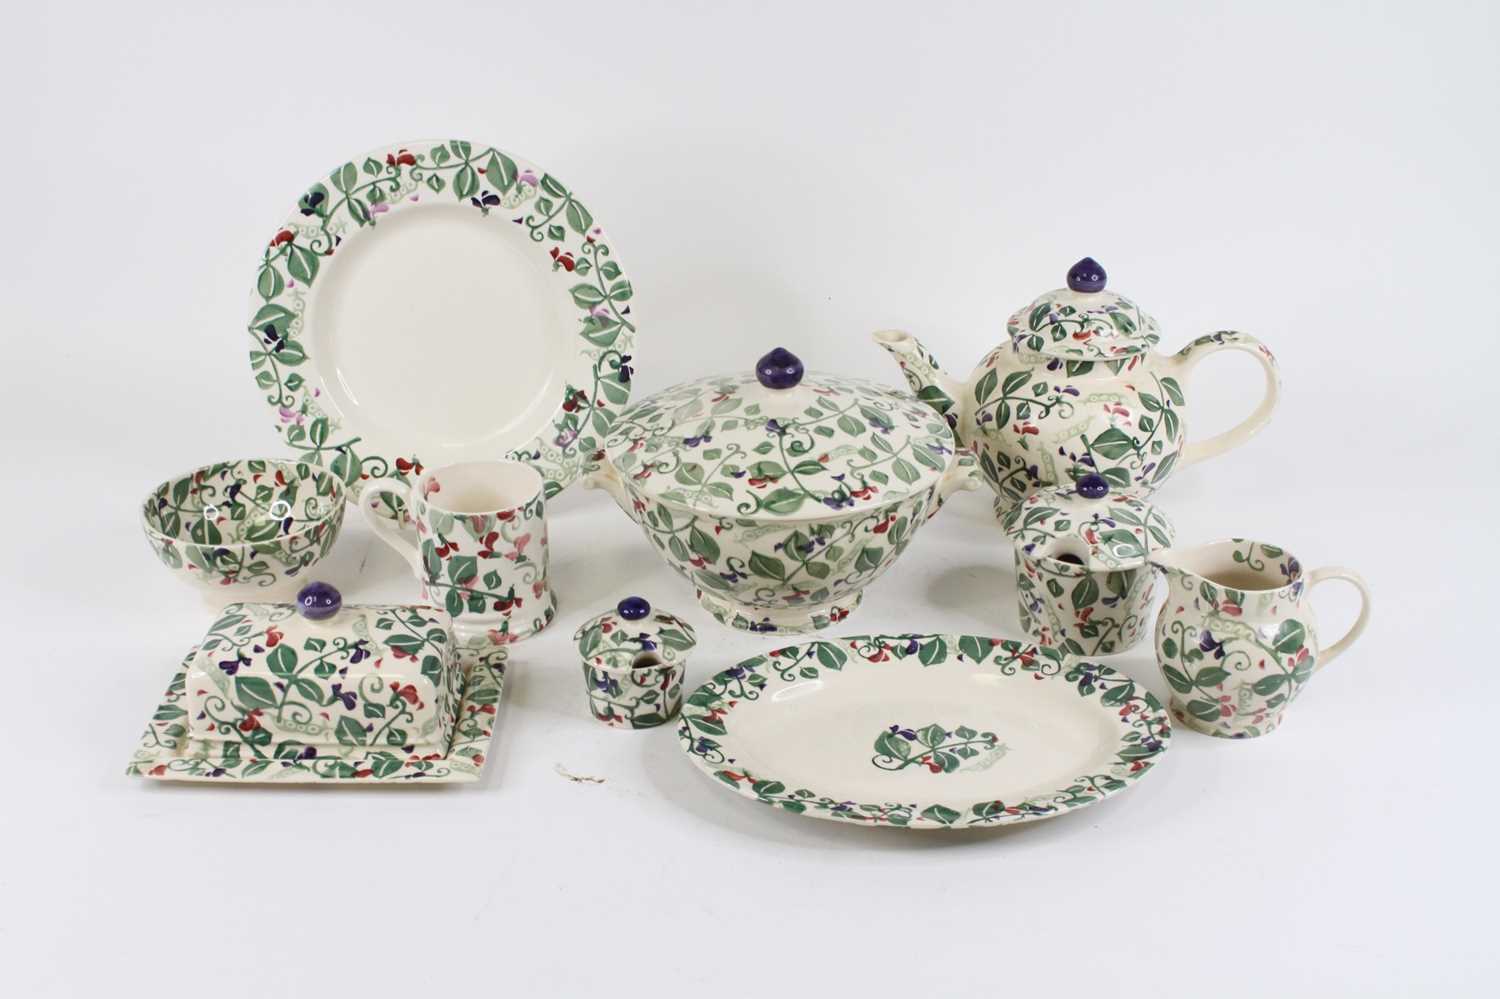 A large collection of Emma Bridgewater Sweetpea pattern tea, coffee and dinnerwares. UK mainland